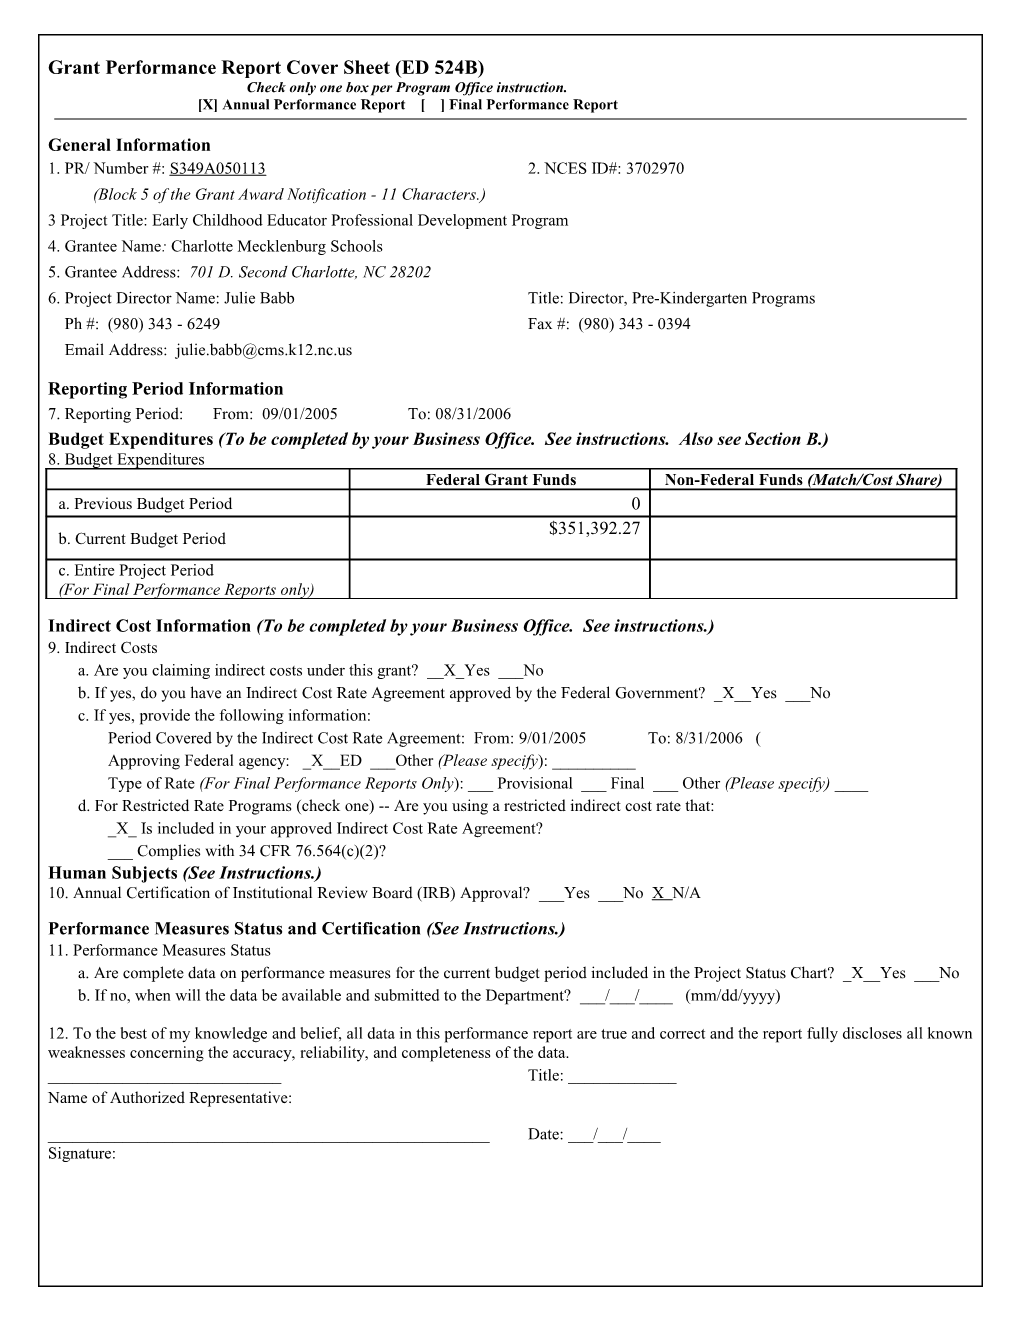 S349A050113: ED Grant Performance Report Cover Sheet (MS Word)